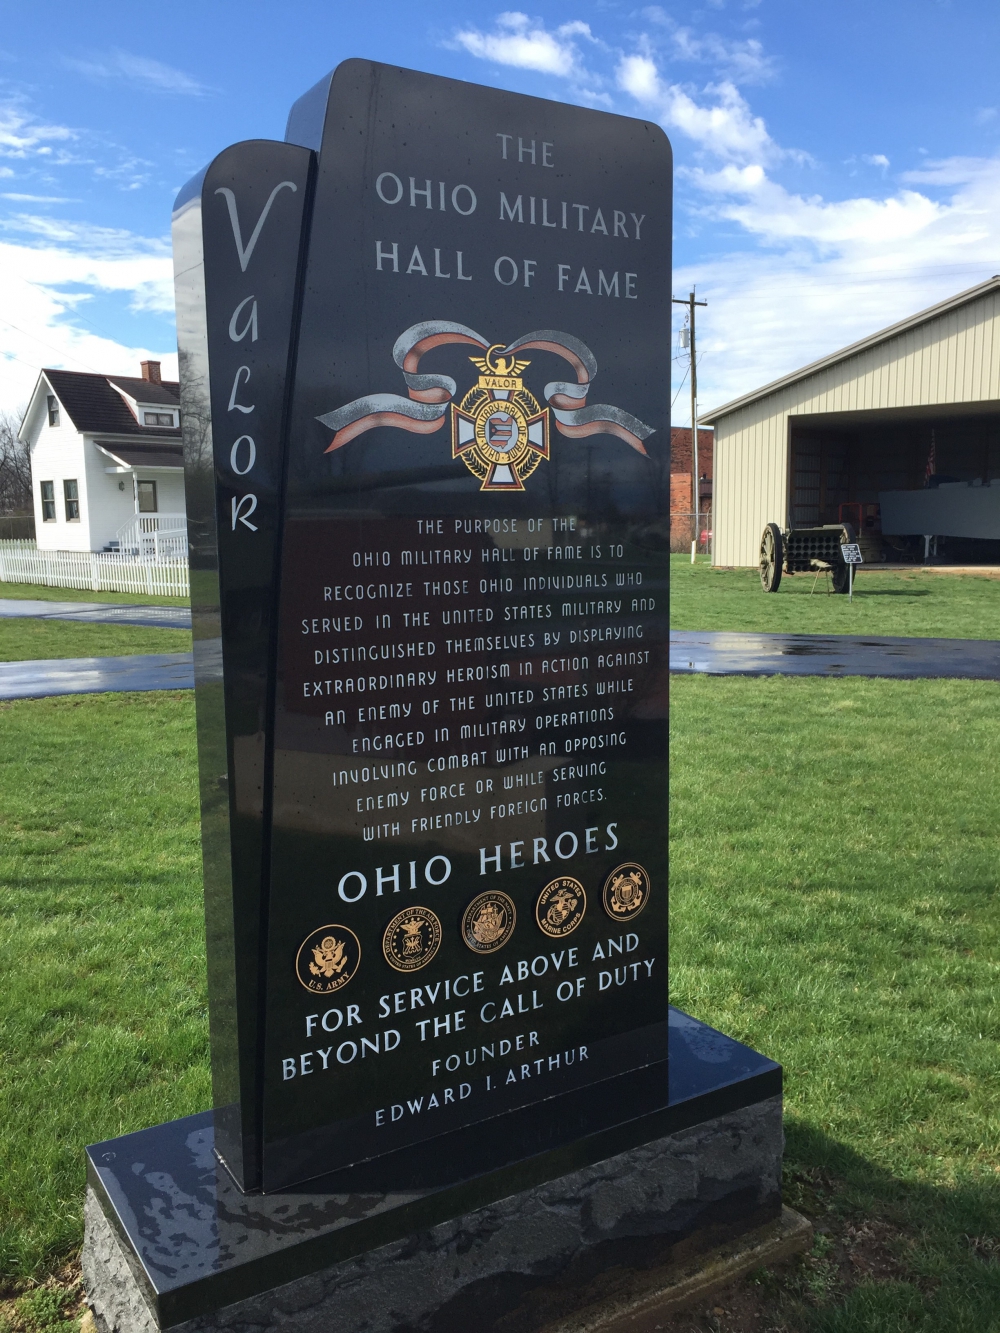 The Ohio Military Hall of Fame Memorial